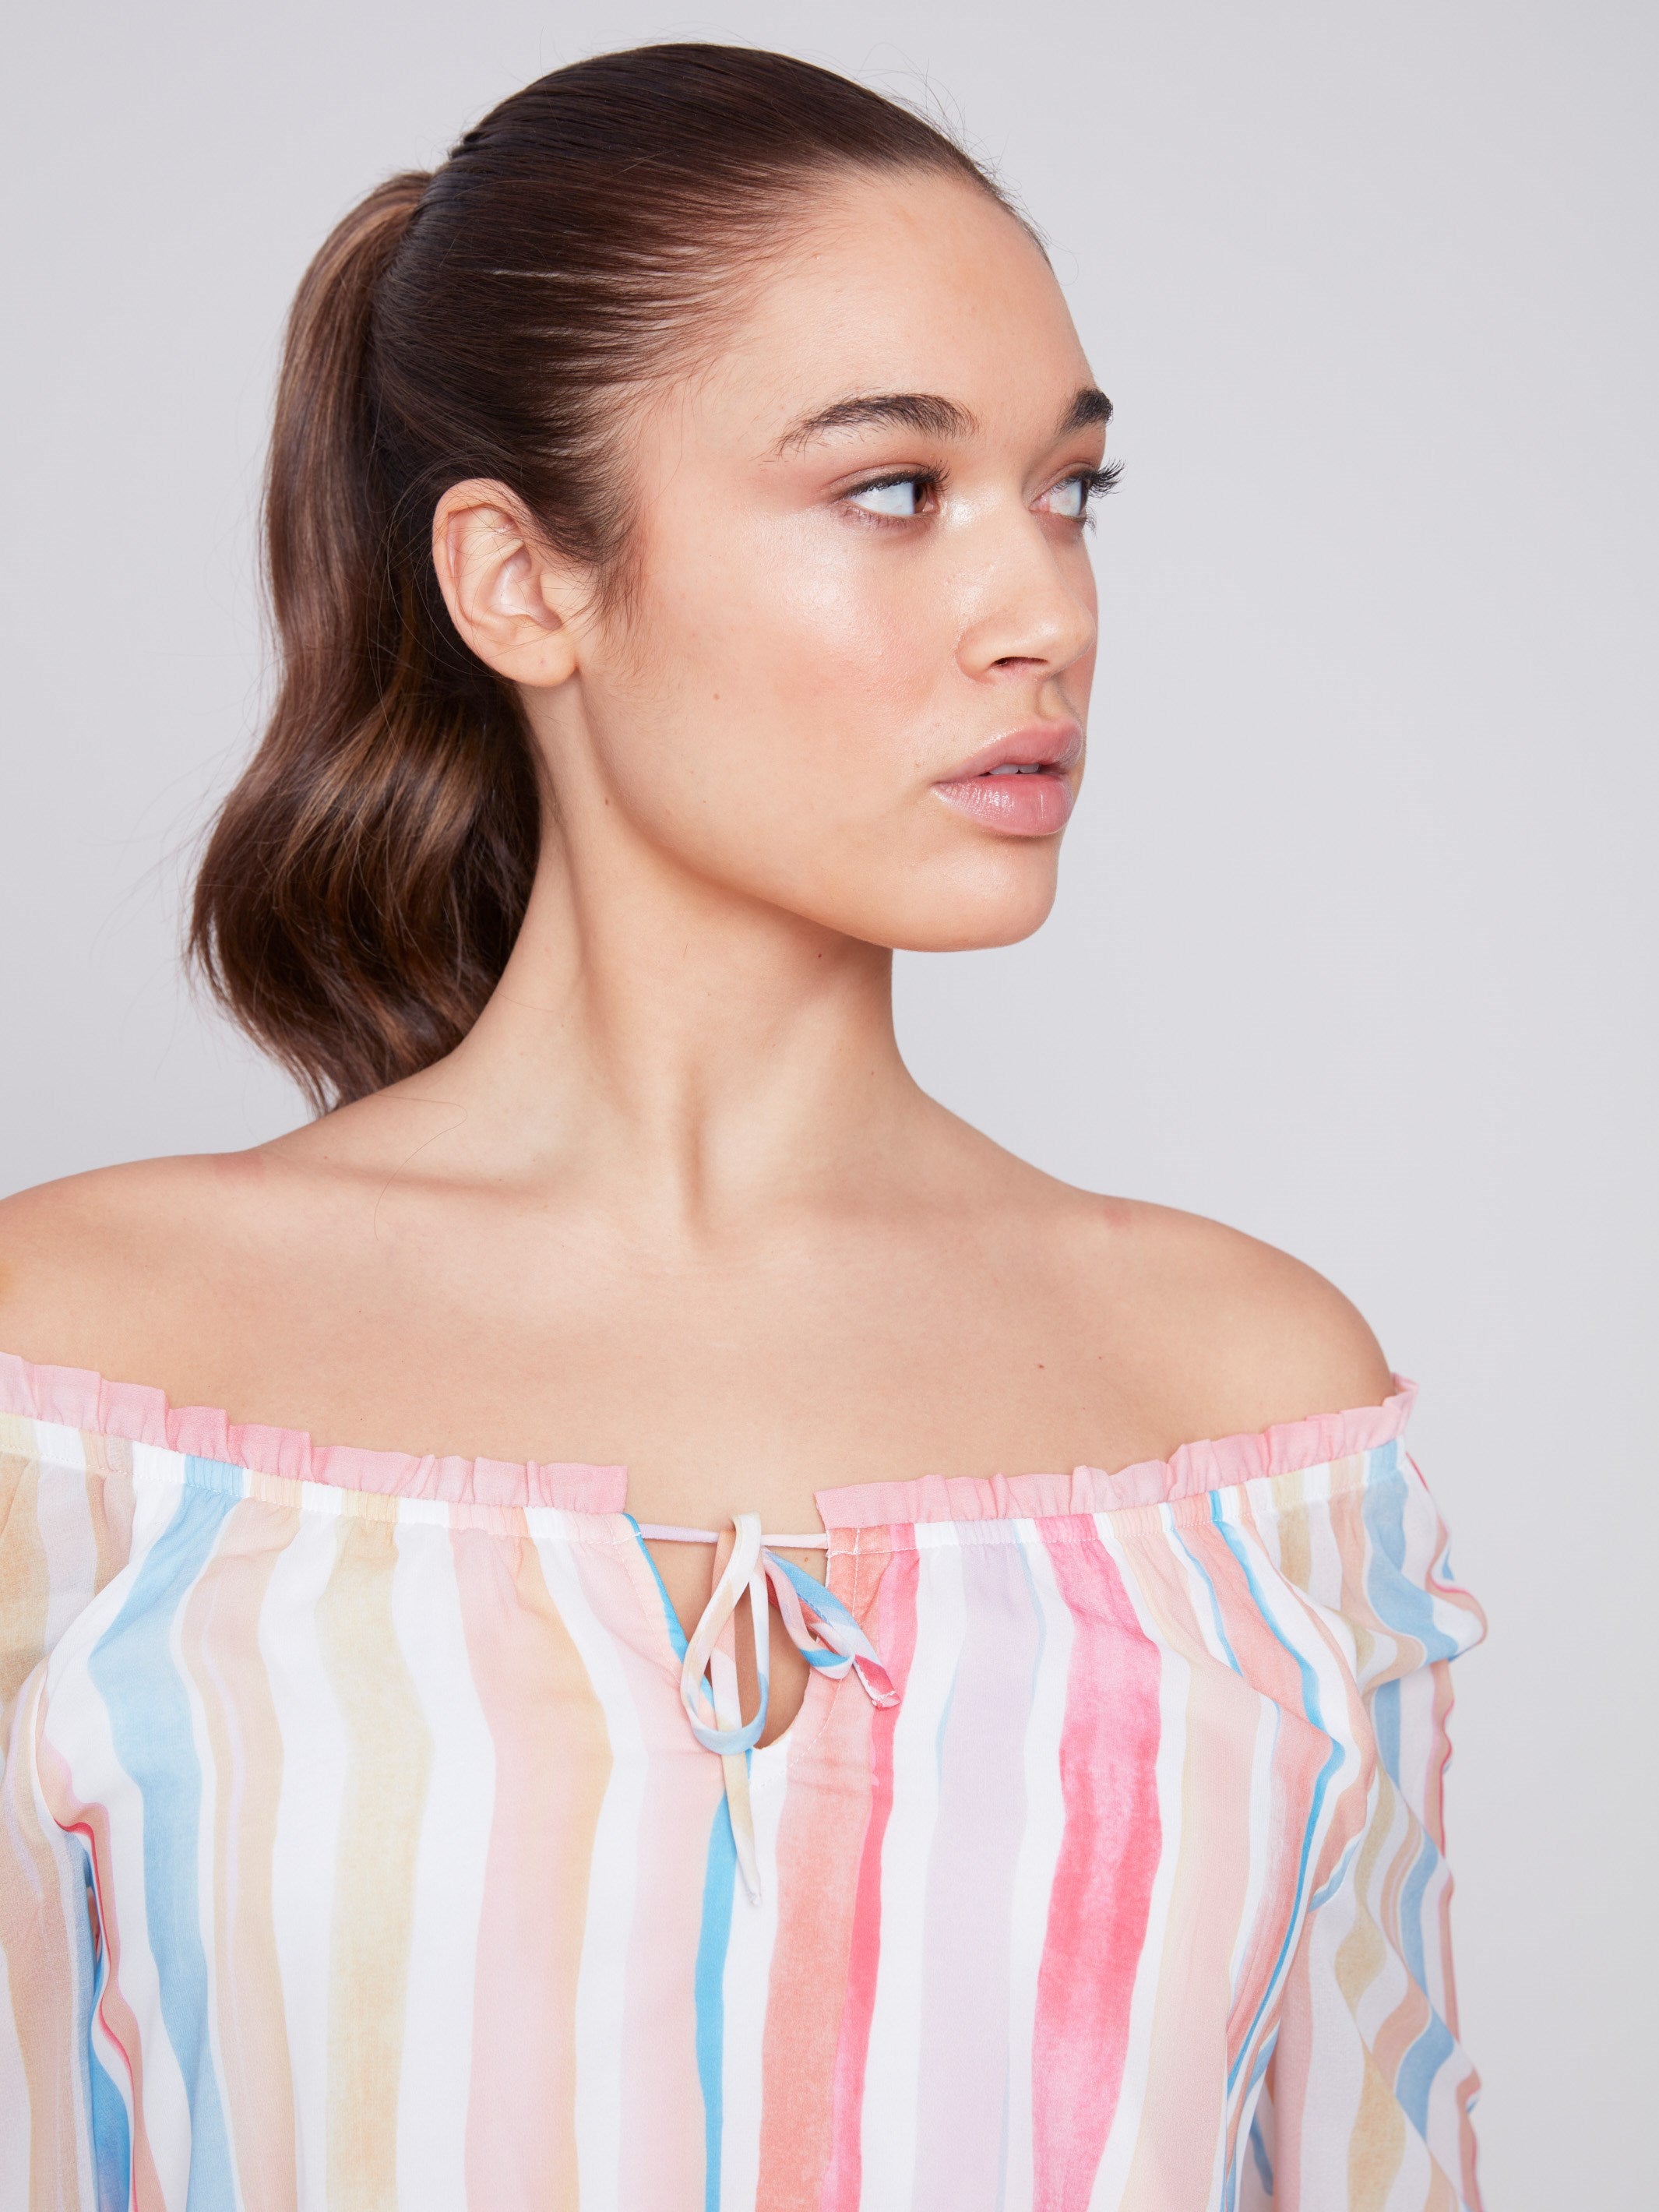 Printed Chiffon Blouse - Stripes - Charlie B Collection Canada - Image 4